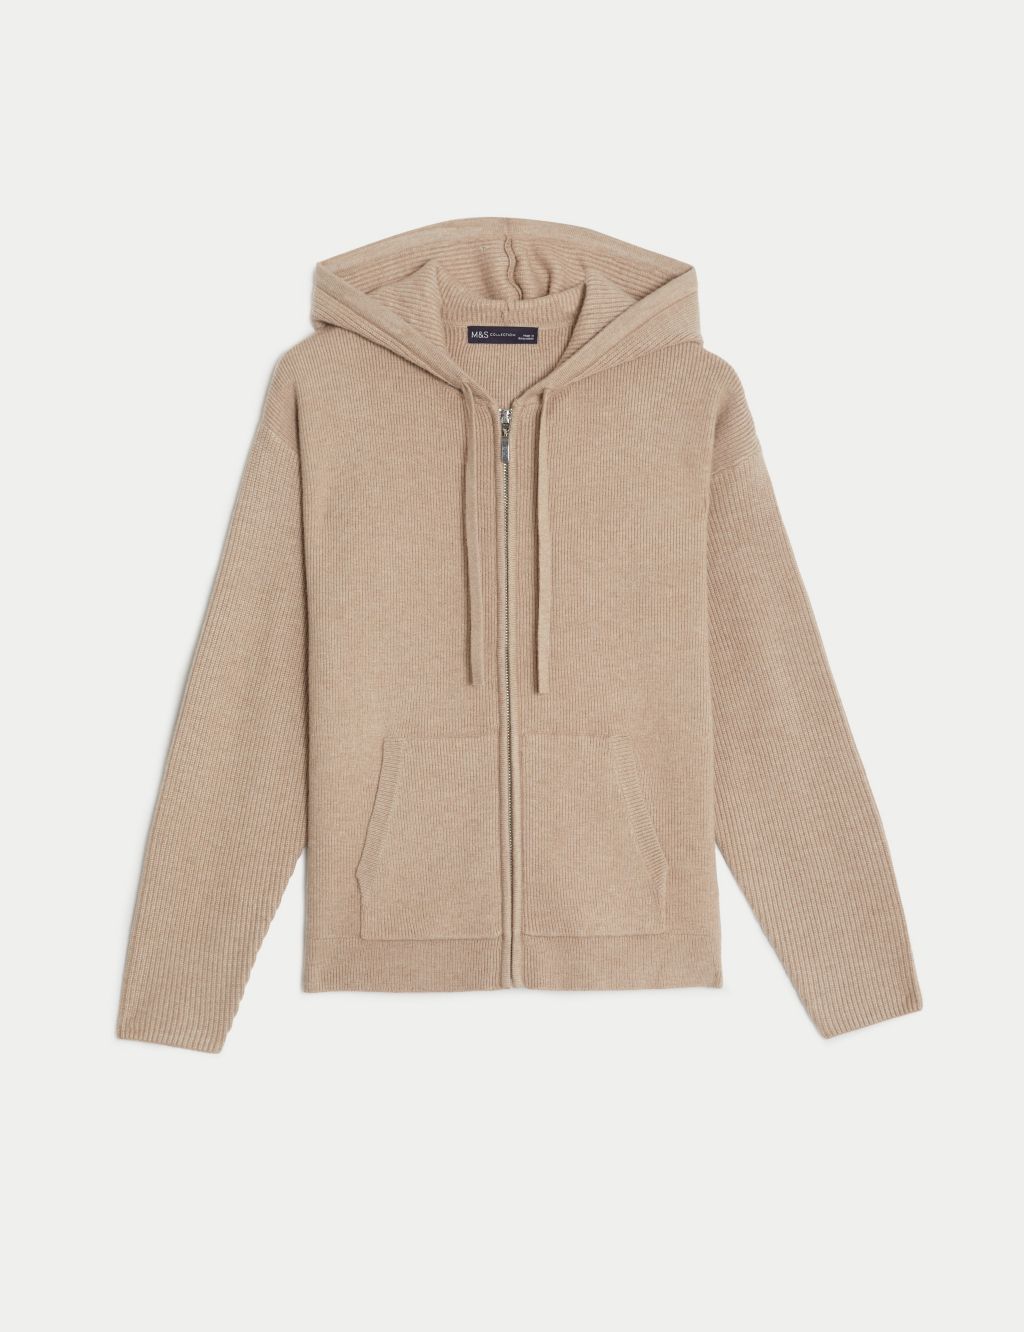 Soft Touch Zip Up Hoodie image 1